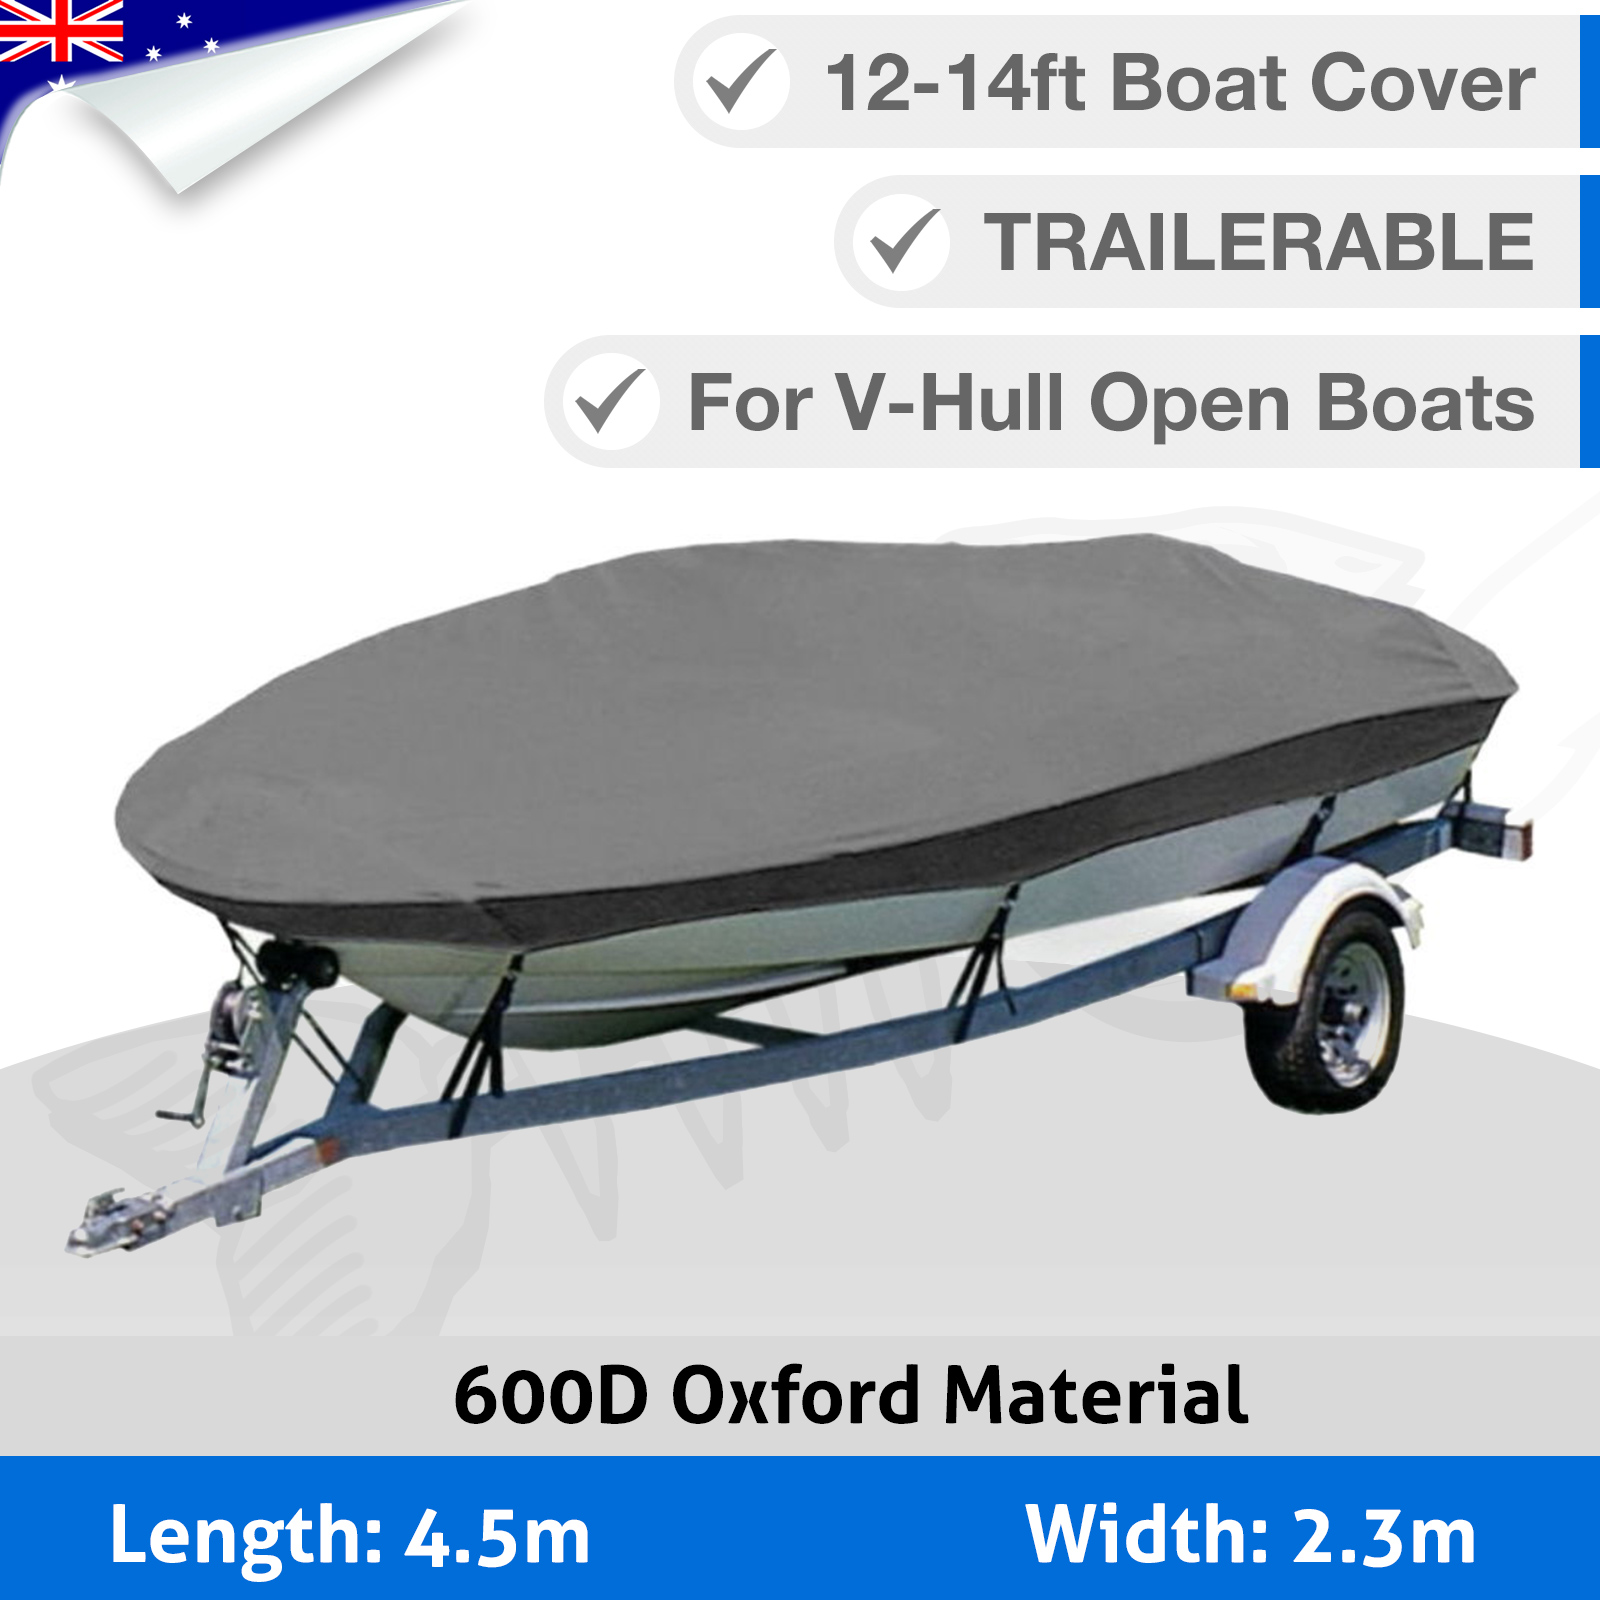 COCO Best Quality Heavy Duty 600D Polyester Oxford Canvas Trailerable Boat Cover with Nylon Rope Fits V-Hull/Tri-Hull/Runabout/Fishing Boat Universal/Waterproof ABS PVC Adjustable 12 to 54 Black 